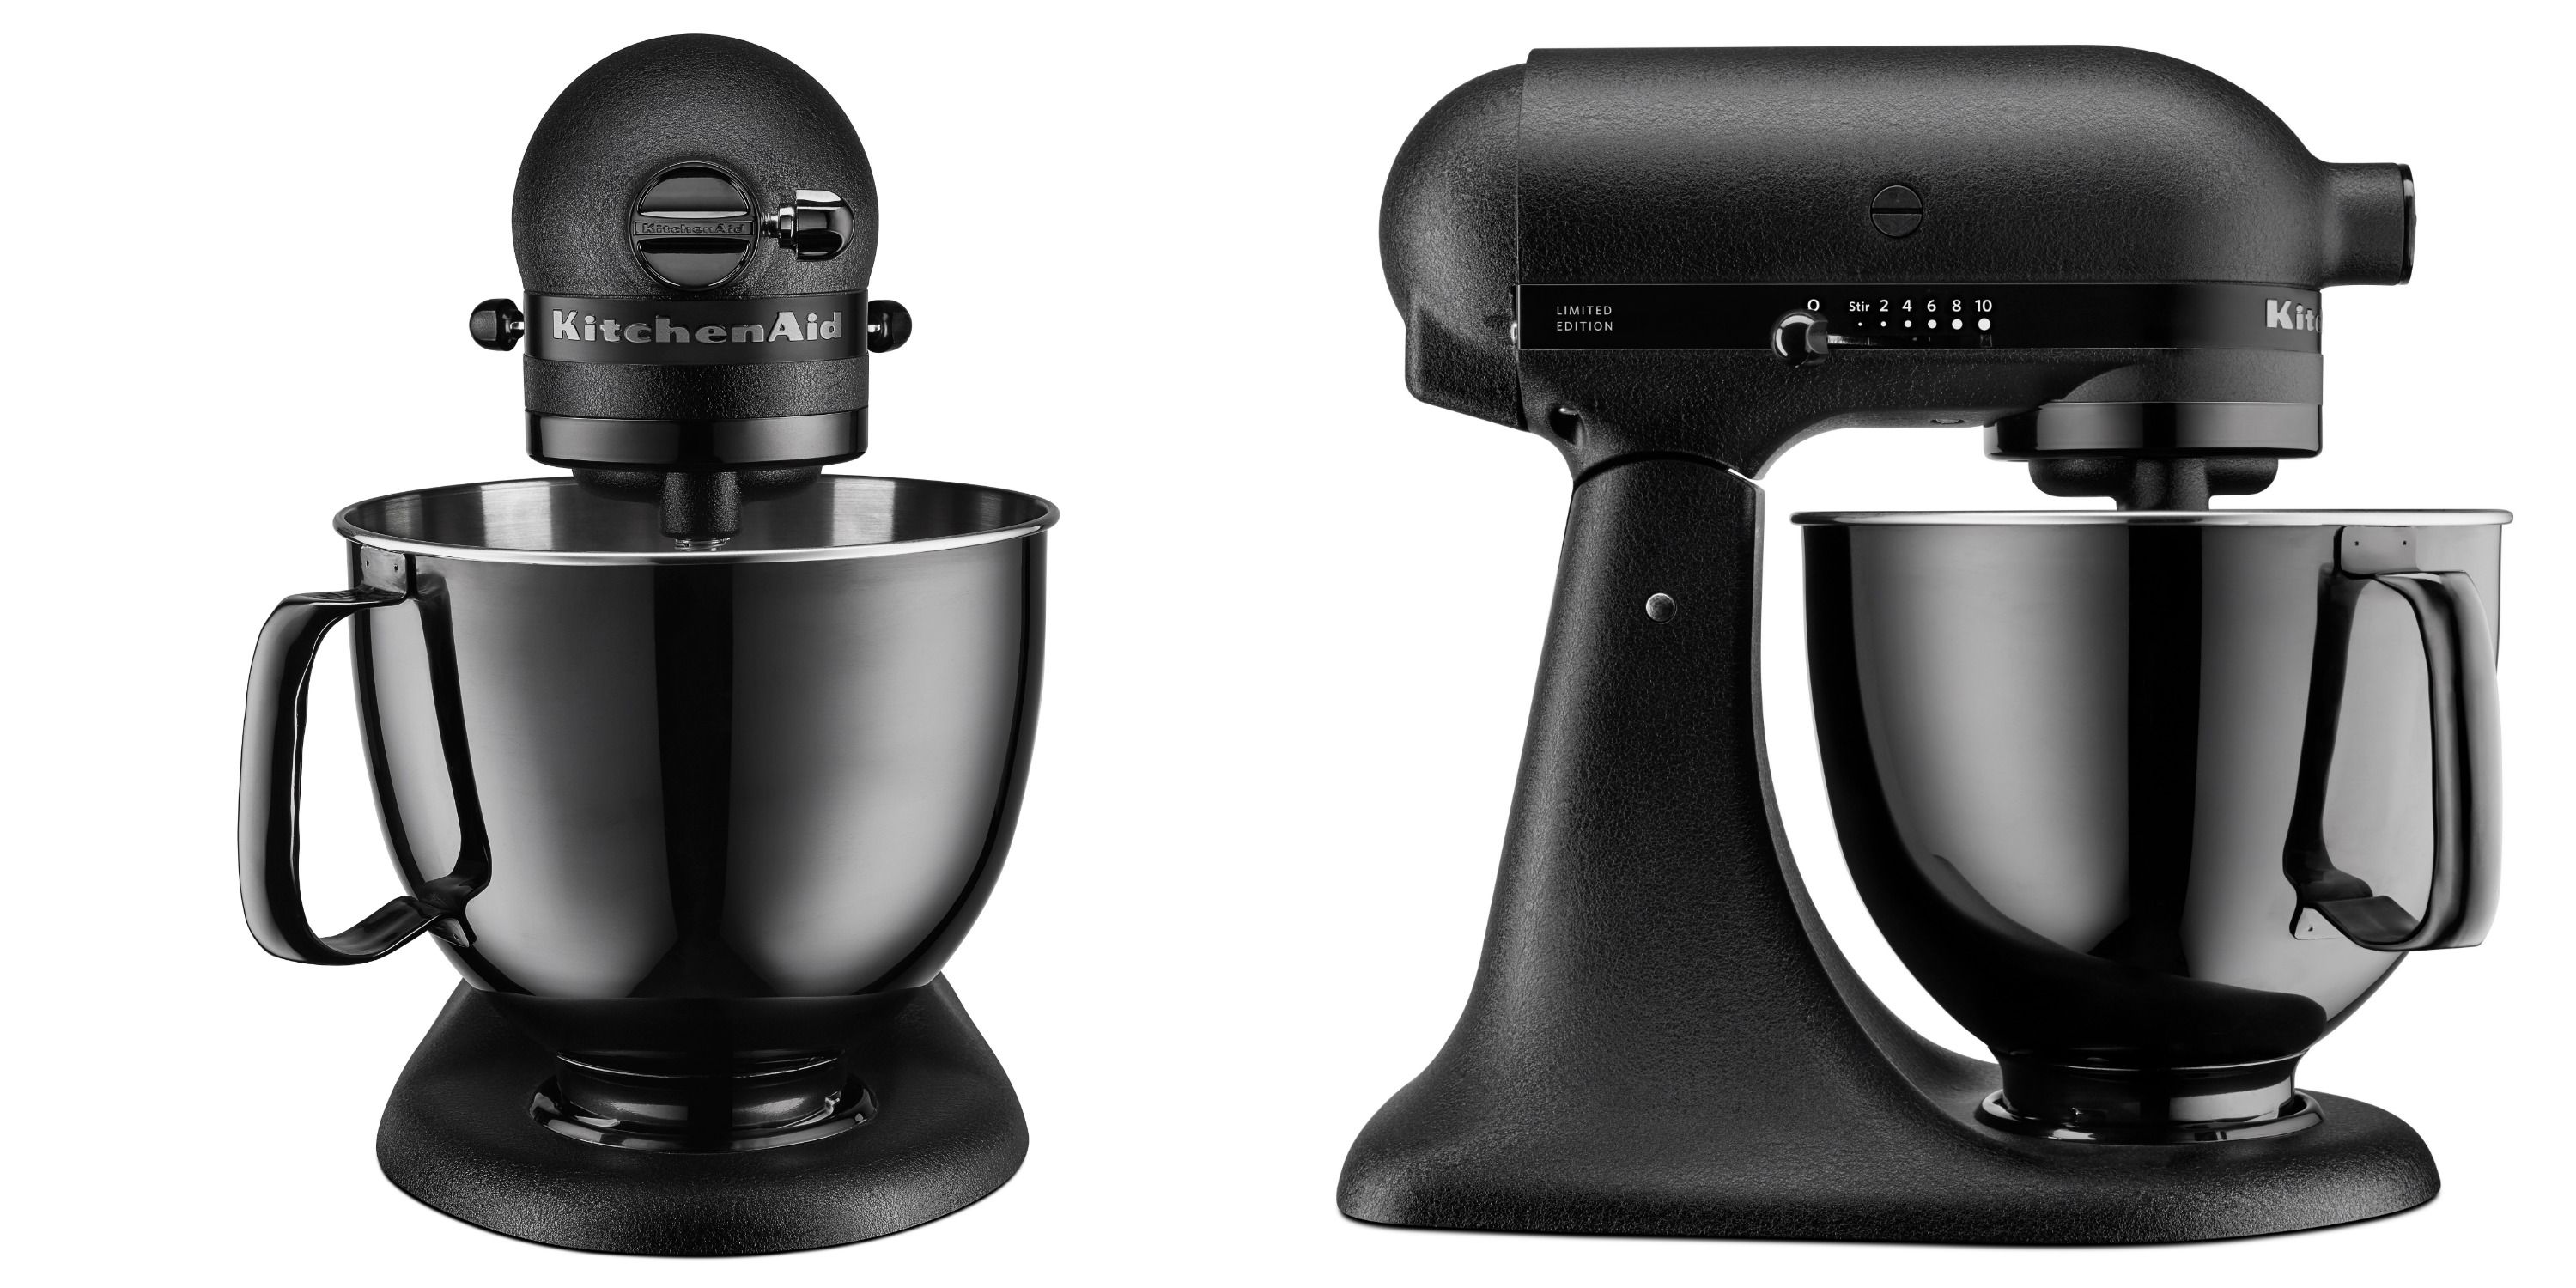 KitchenAid All-Black Mixer Now Available - All-Black Limited Edition